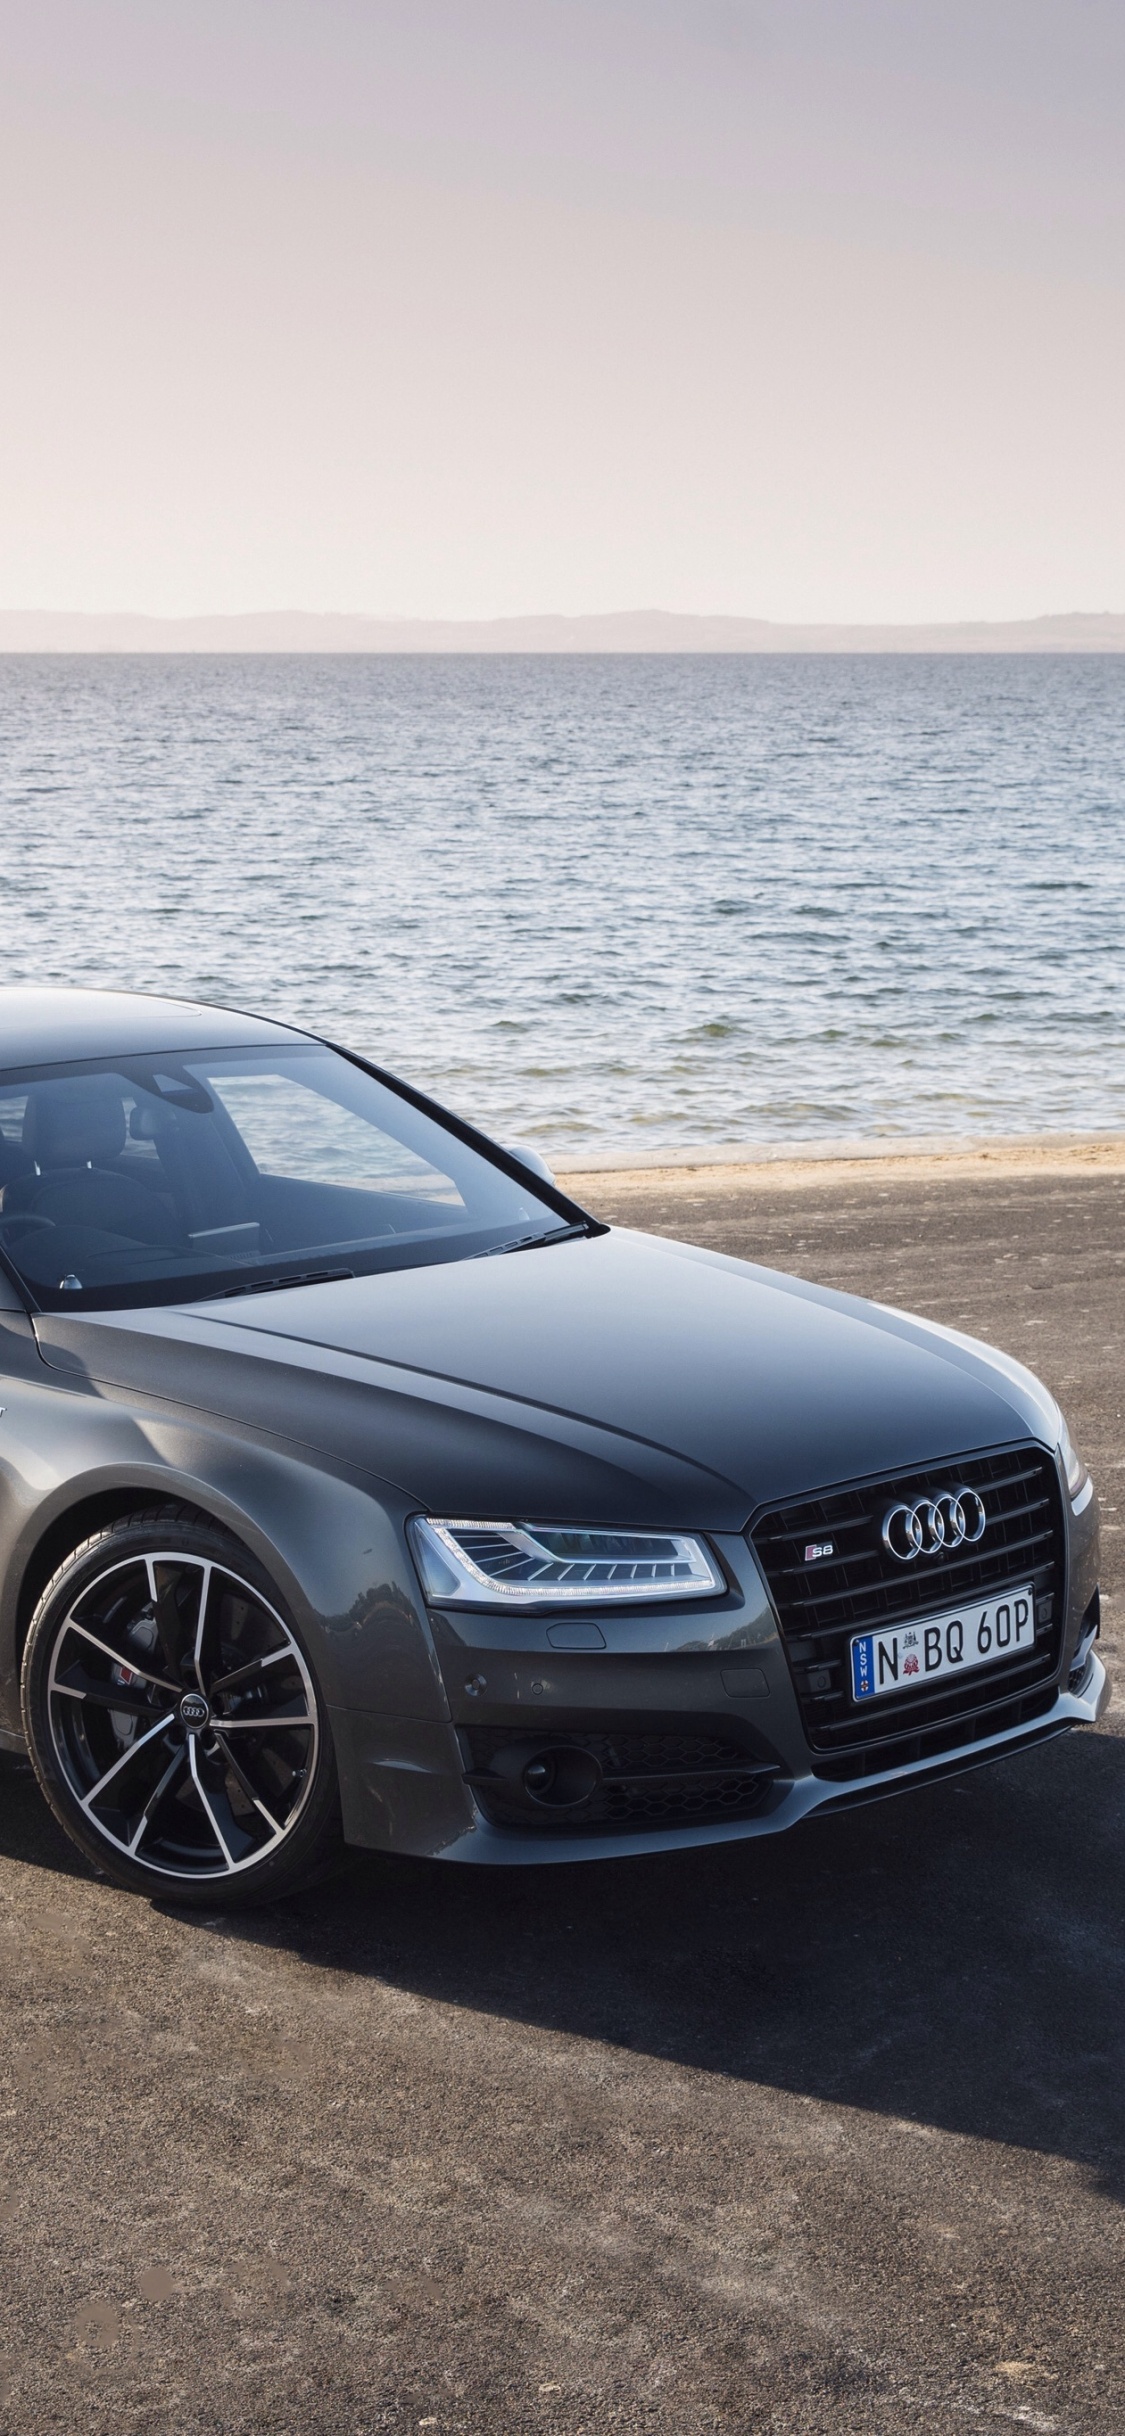 Black Audi a 4 on Beach During Daytime. Wallpaper in 1125x2436 Resolution